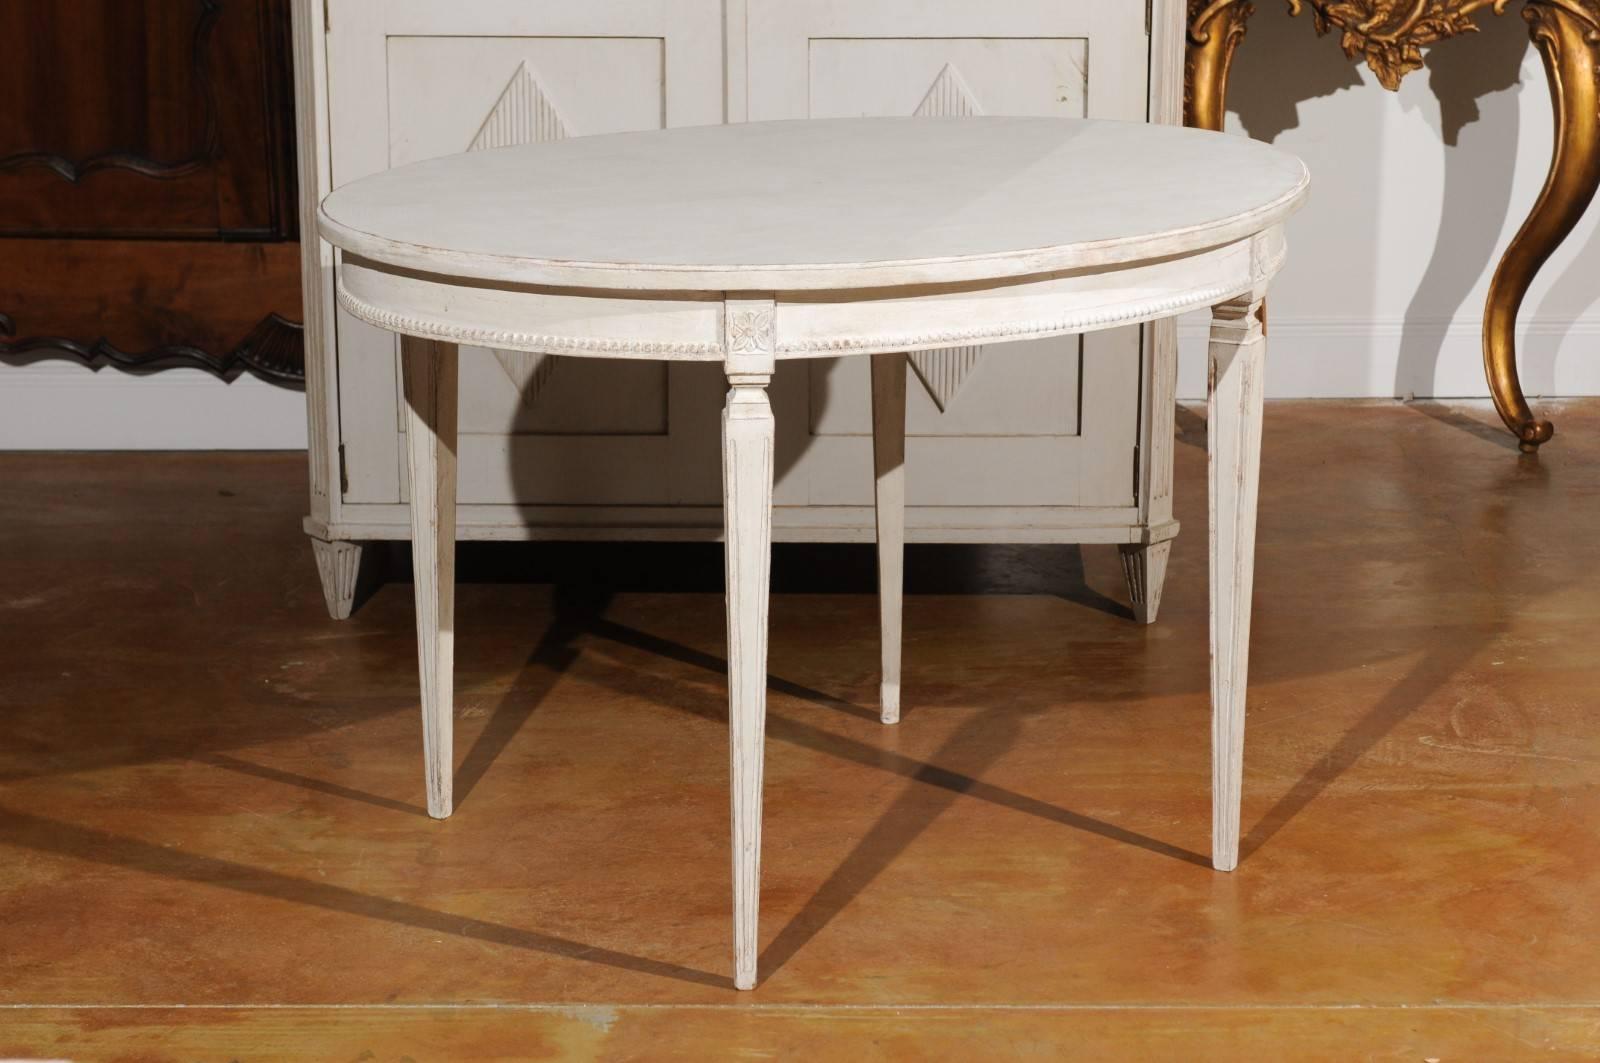 A Swedish Gustavian style early 20th century painted oval table from Växjö. Born in the southern town of Växjö in the Kronoberg County, this Swedish painted table features an oval top sitting above an elegant apron, delicately accented with beaded